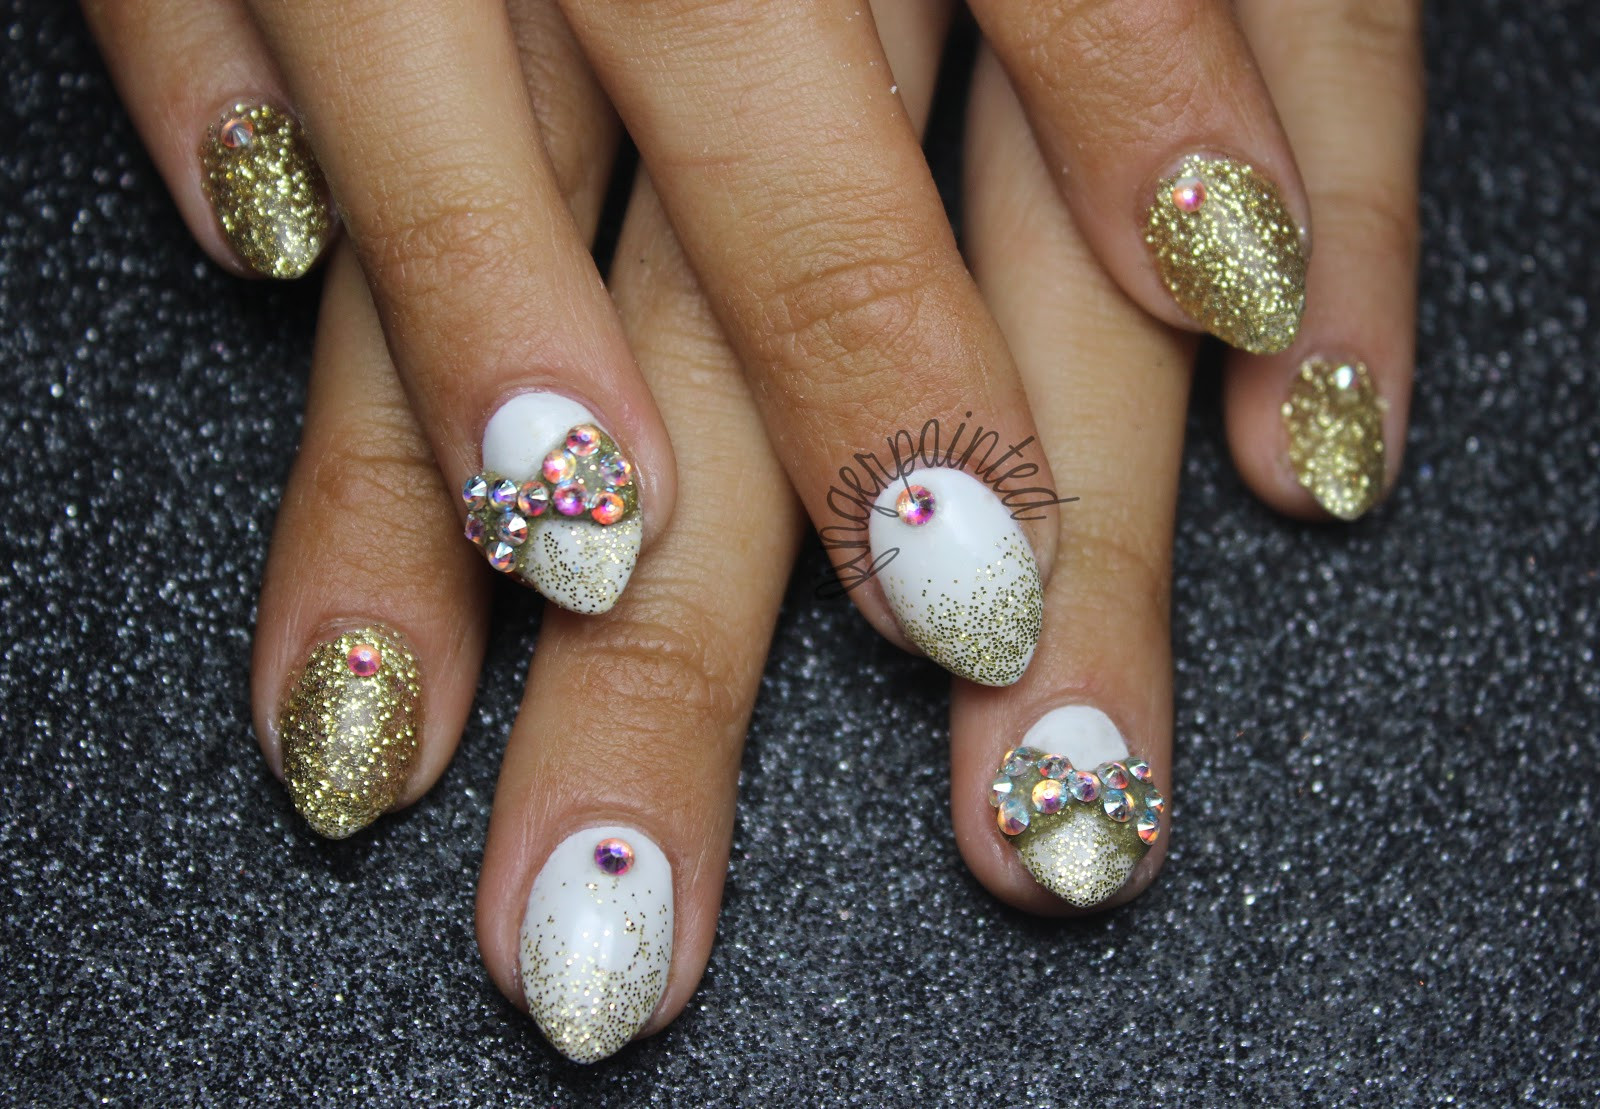 White Nails With Gold Glitter
 Acrylic Over Natural Nail